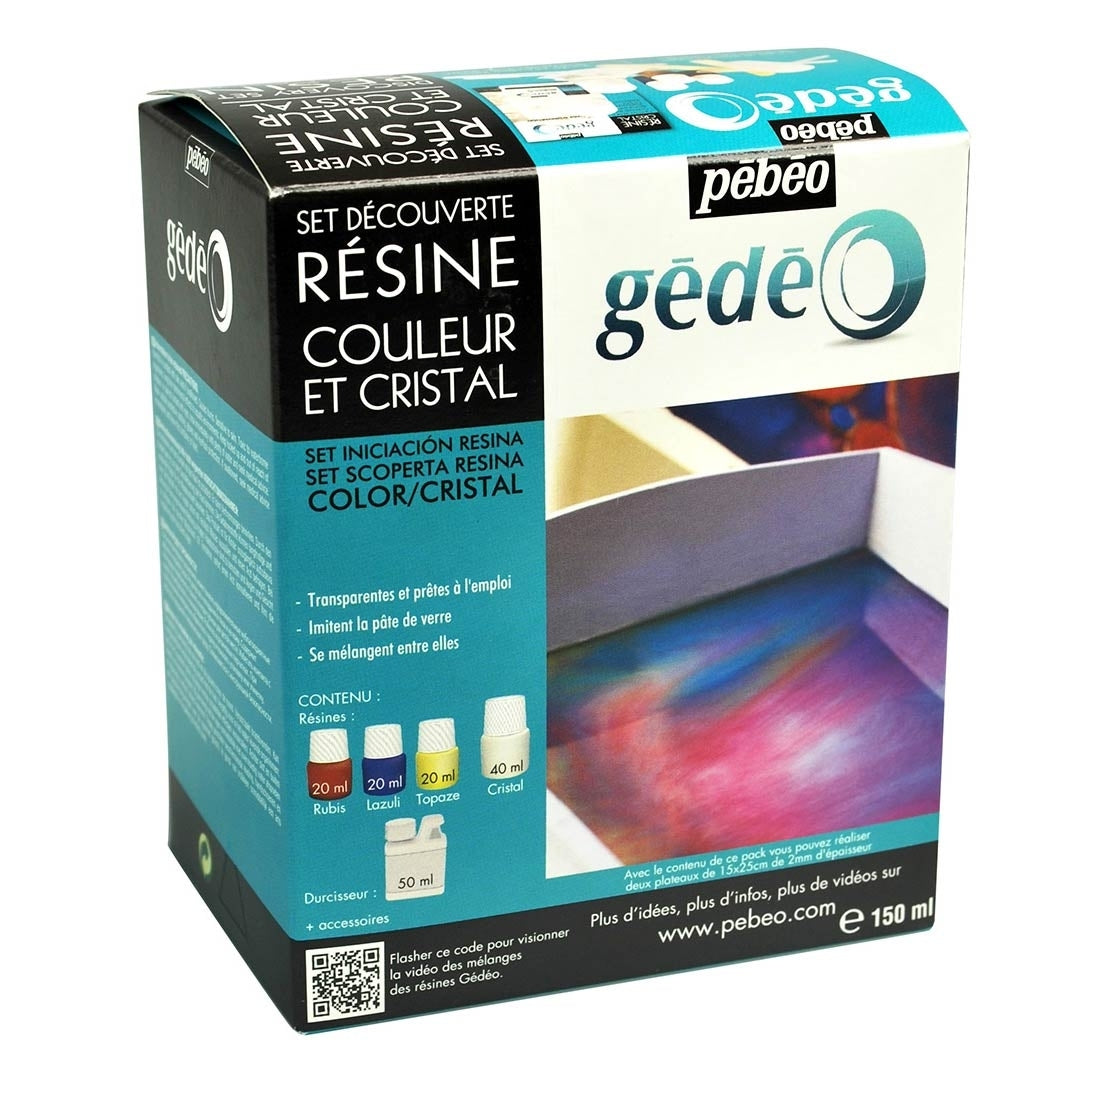 Pebeo - Moulding and Casting - Gedeo Resin Discovery Kit - Asstorted